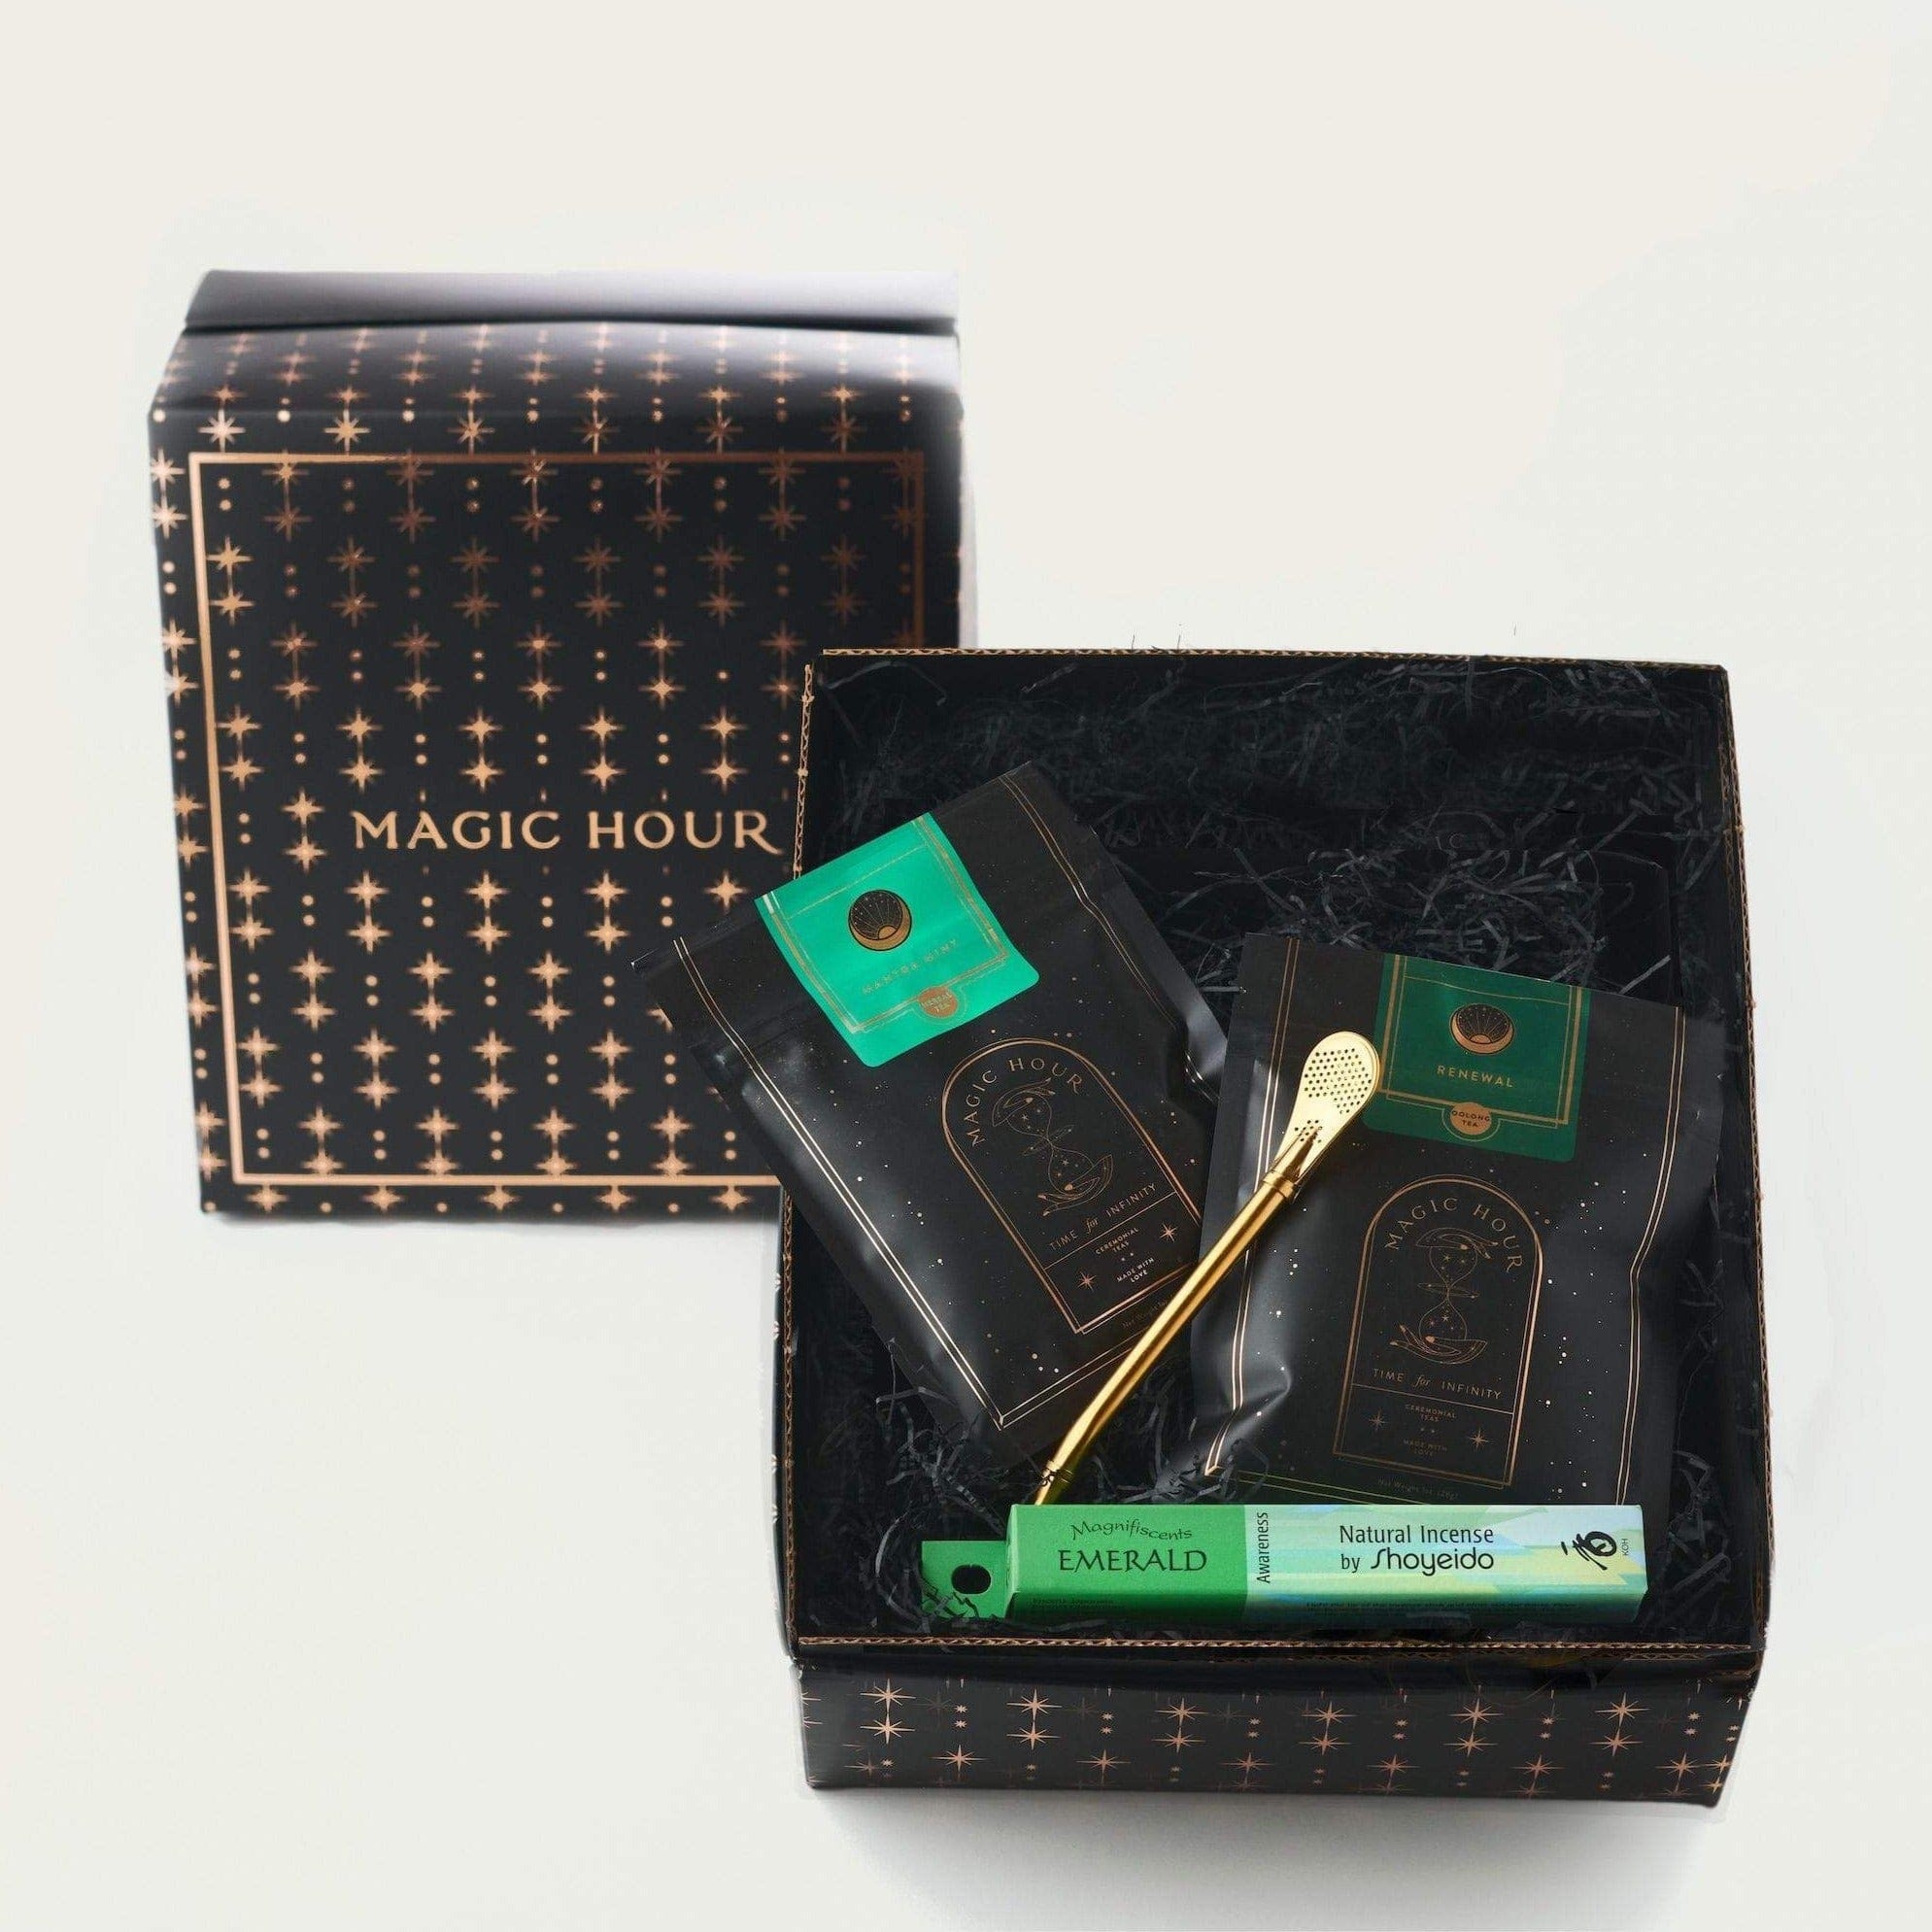 A black box labeled "Renew & Relax: Ritual Gift for Mindfulness & Calm by Magic Hour" is open, revealing its contents. Inside are two black packages with green labels and a gold metallic spoon. Another green box labeled "Emerald Natural Incense by Shoyeido" lies beside the packages inside the box, creating a serene setting for your organic tea experience.